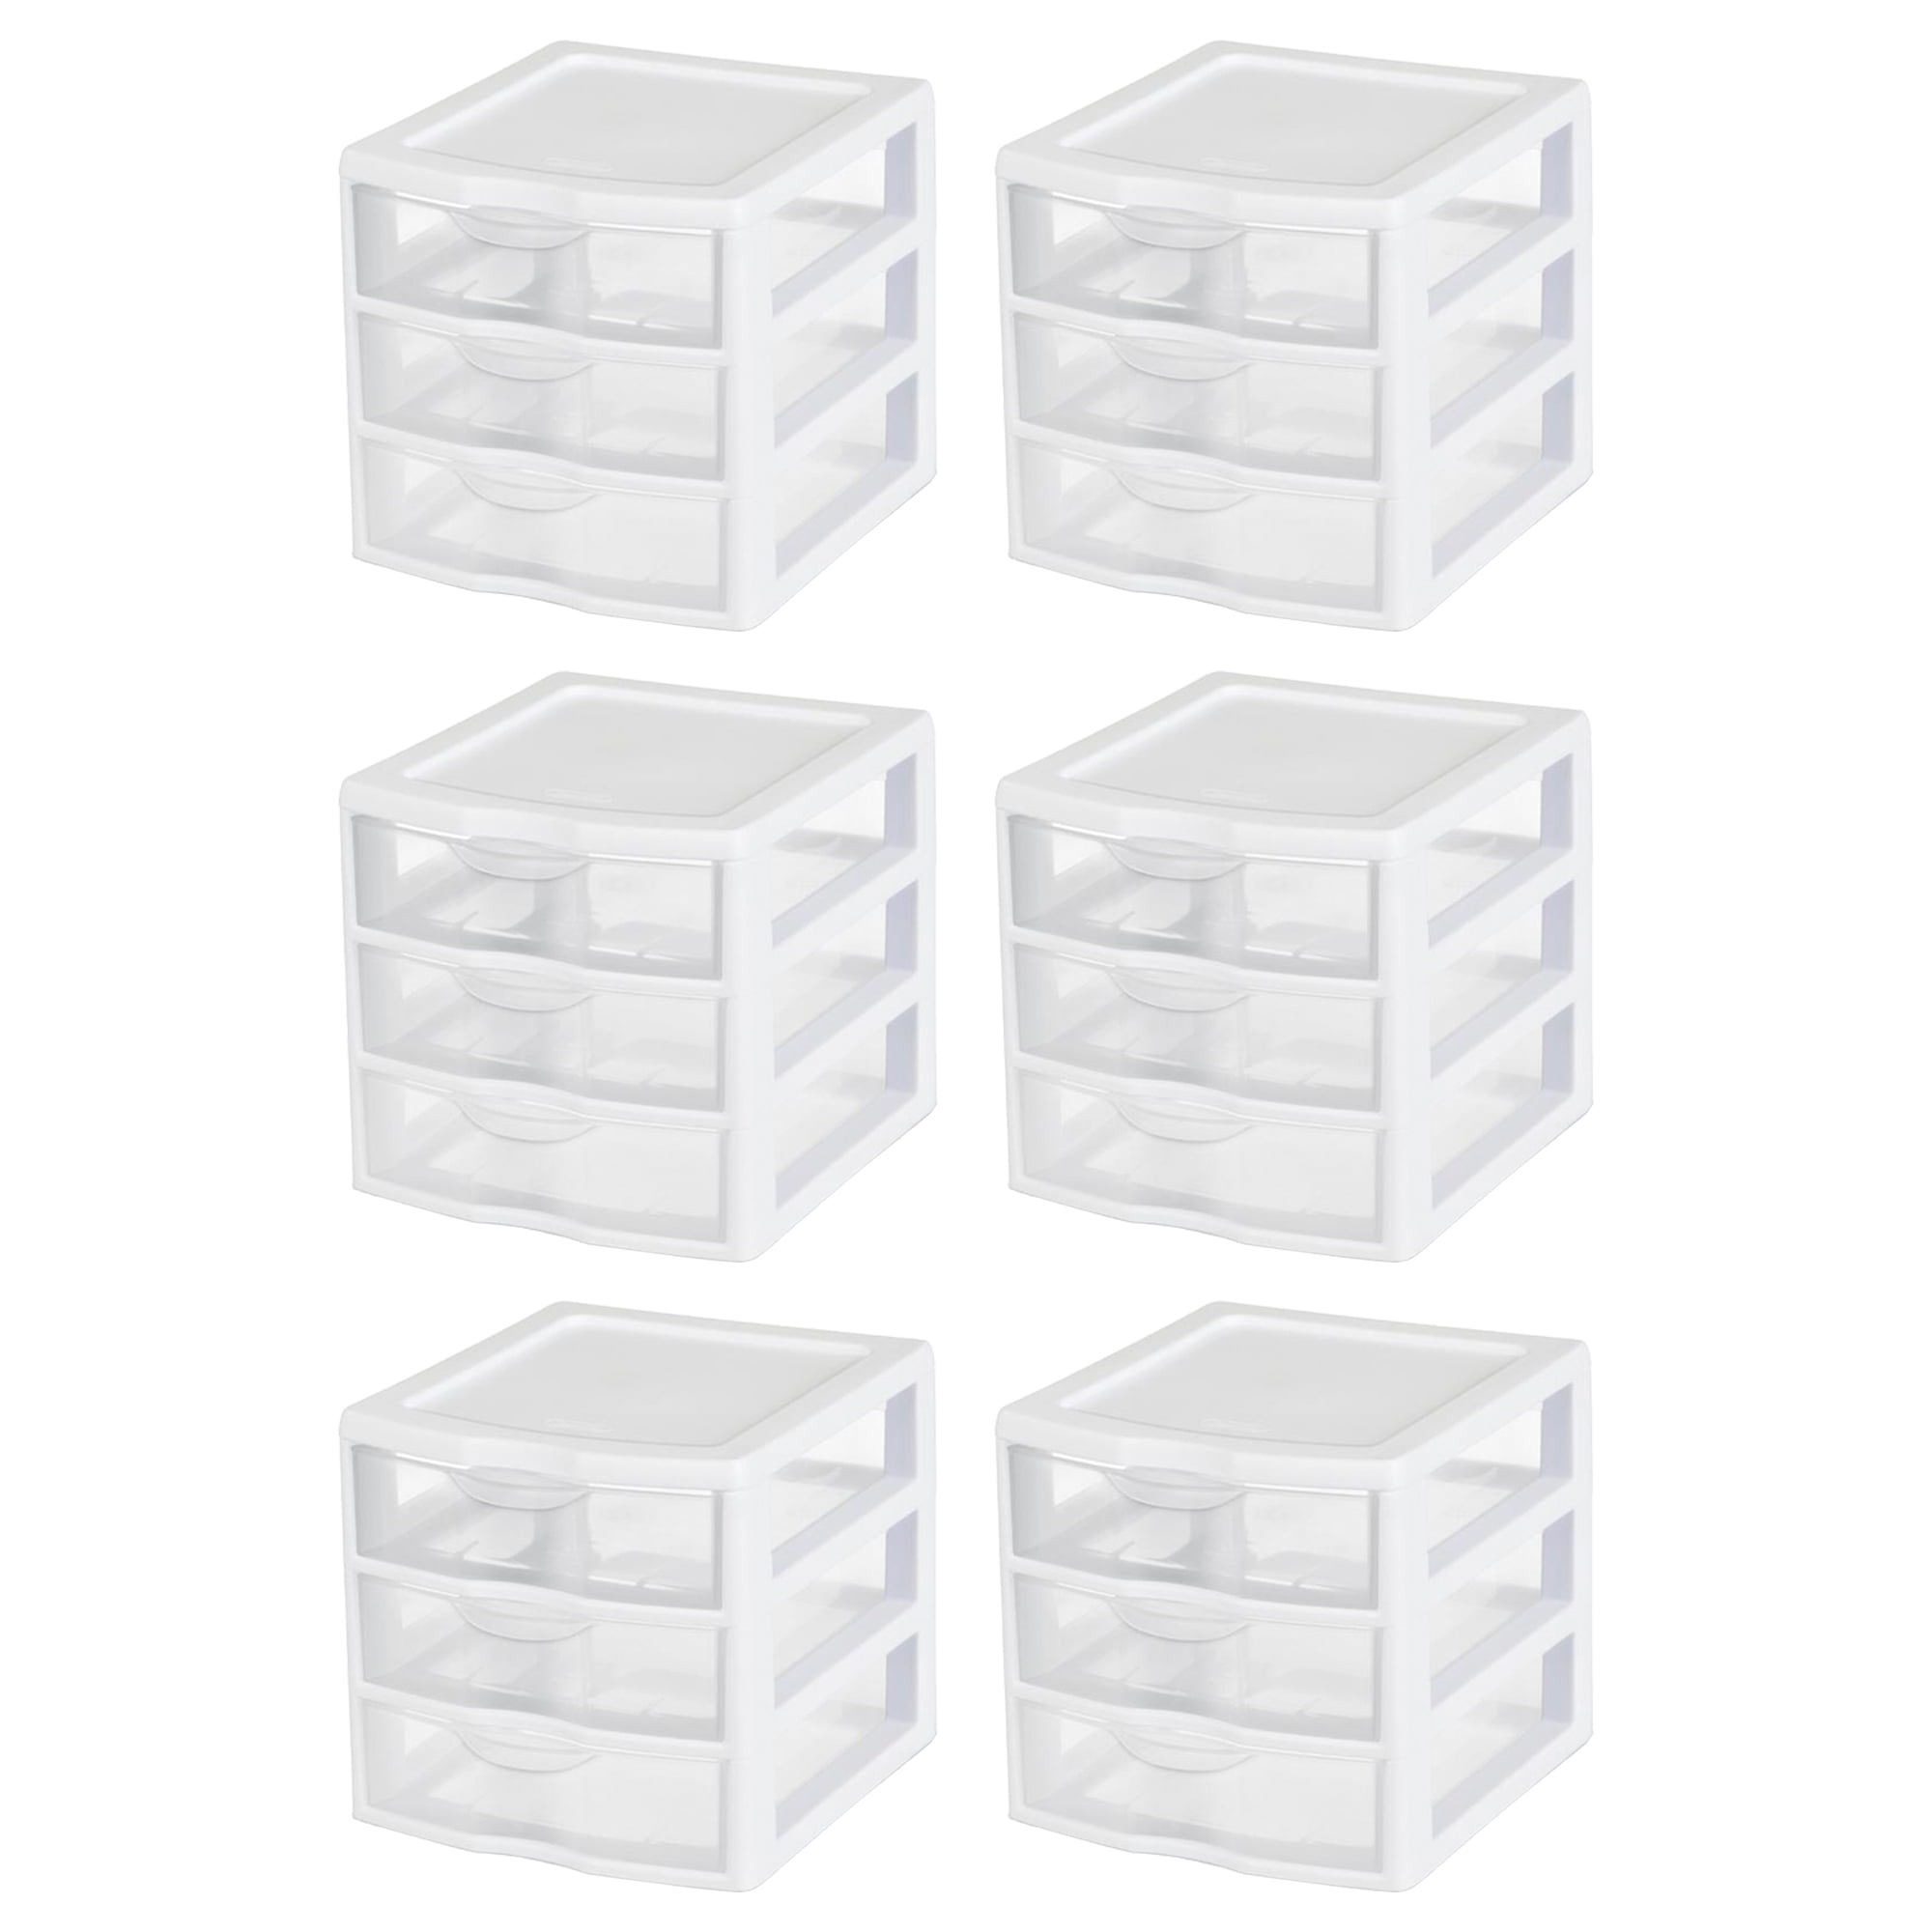 Details about   4 Drawer Wide Weave Tower Durable Plastic Indoor Home Storage Organizer White 